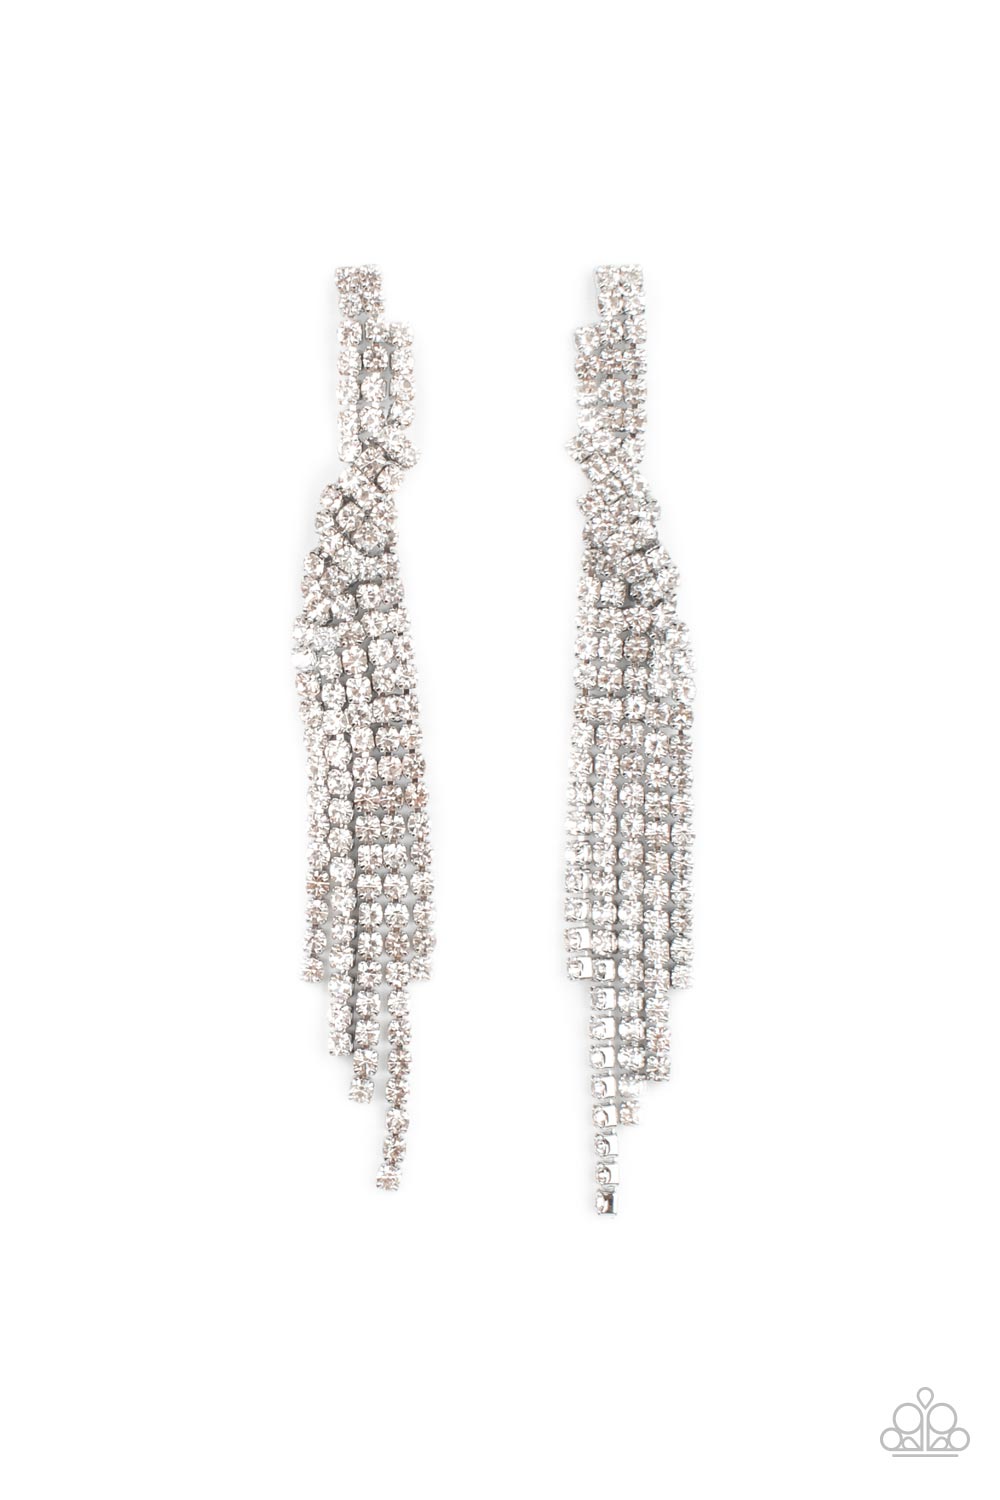 Cosmic Candescence White Earring - Paparazzi Accessories  Encased in sleek silver fittings, dainty strands of glittery white rhinestones delicately overlap into a tapered tassel for a twinkly look. Earring attaches to a standard post fitting.  Sold as one pair of post earrings.